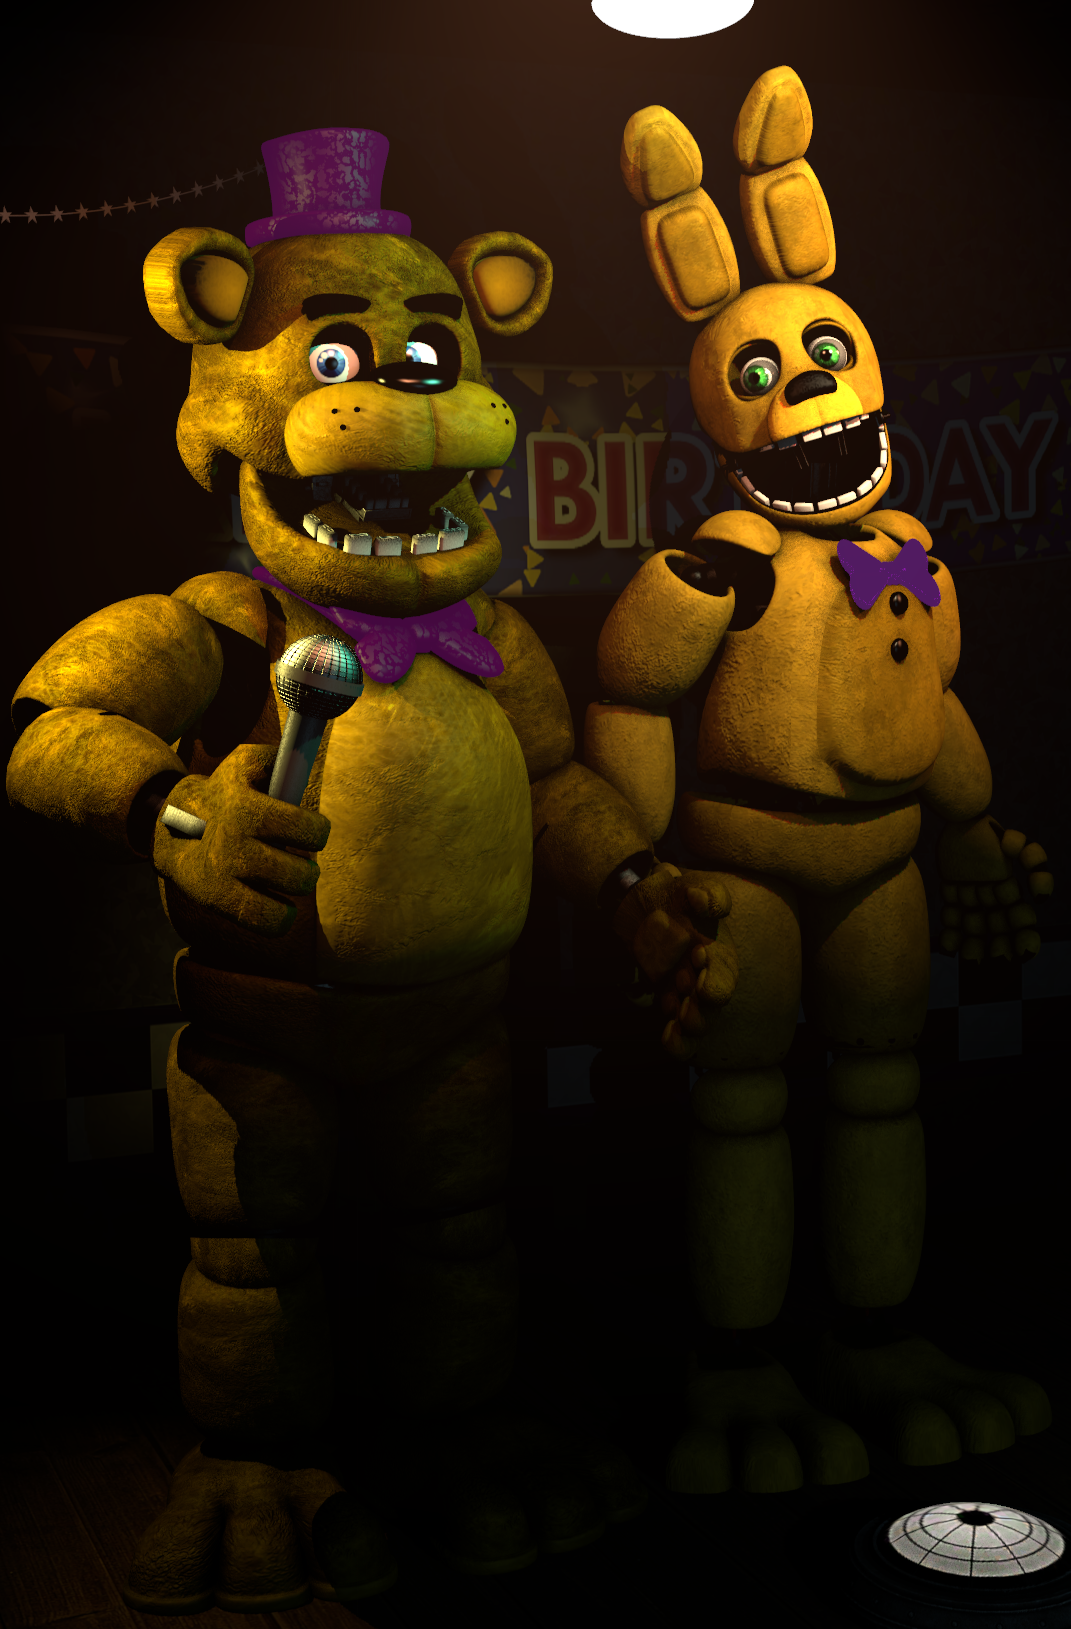 Fredbear And Friends Family Diner by Lukarcadamas on DeviantArt